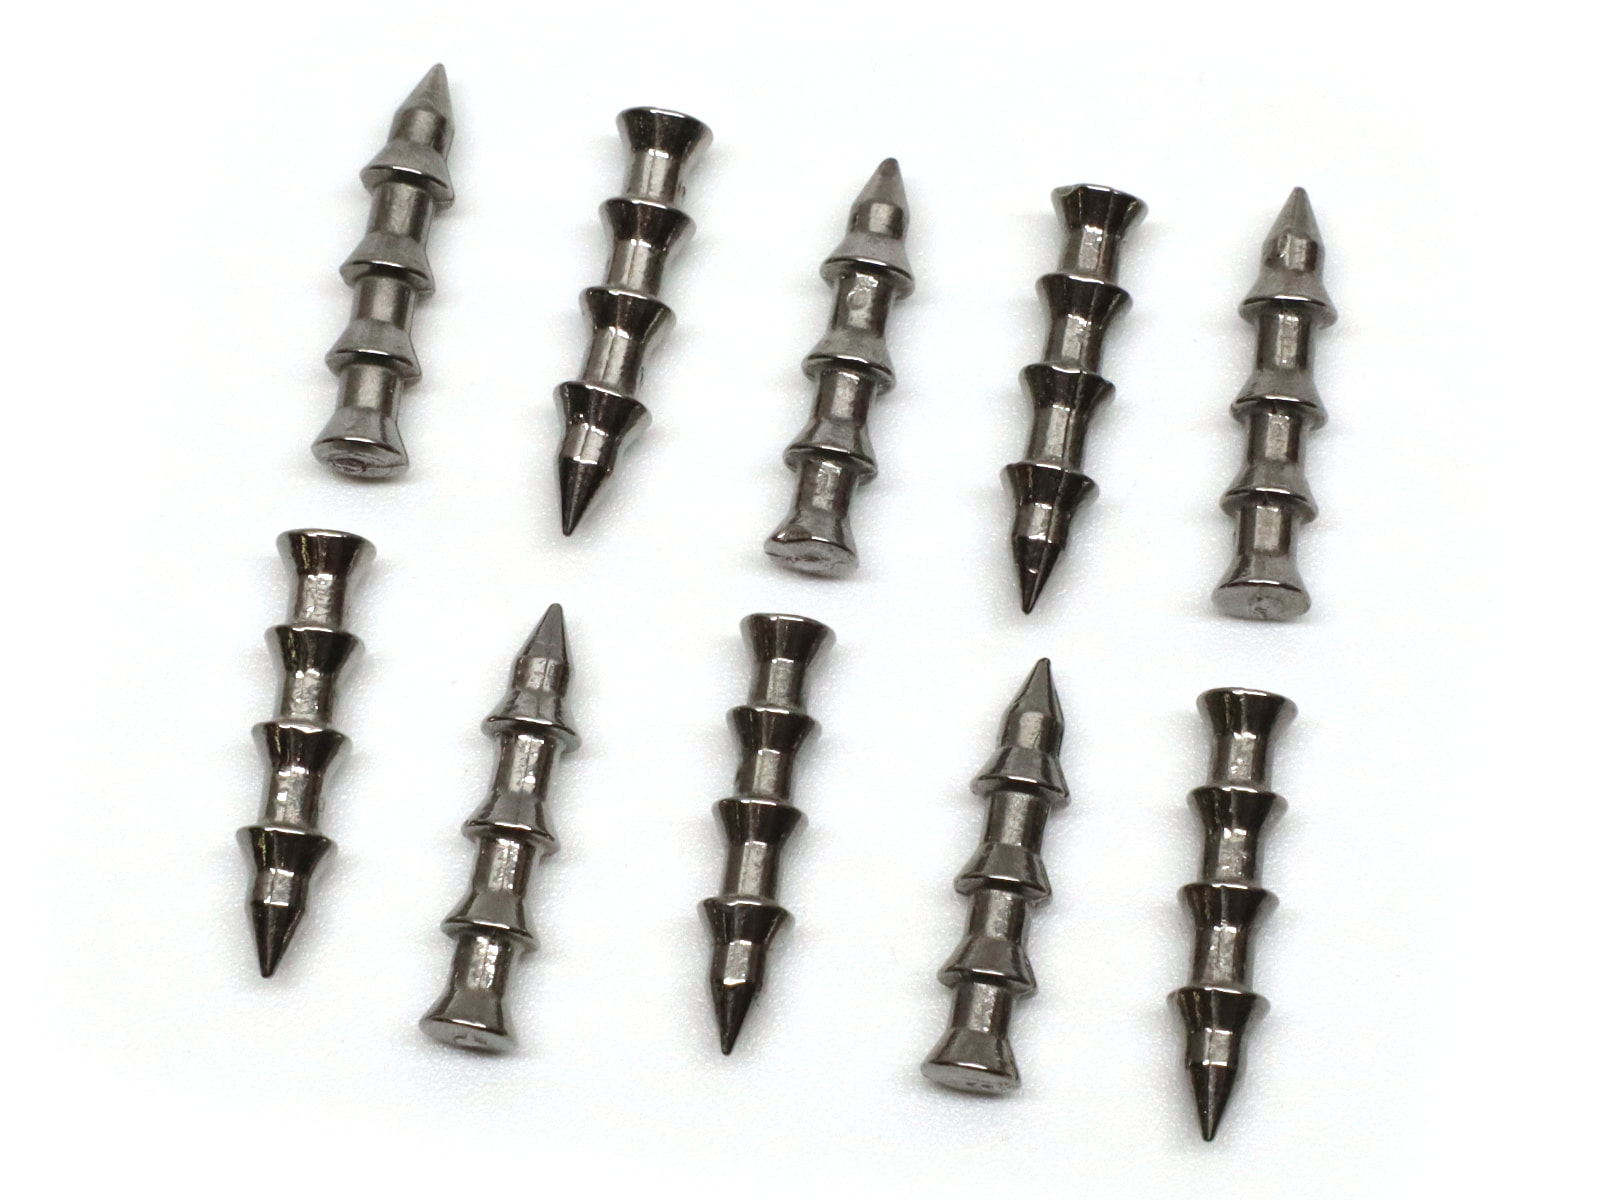 35pcs Nail Weights Kit Tungsten Insert Fishing Weights Sinkers Wacky Worm Nail  Sinkers Pencil Weights for Bass Fishing Tackle in Various Sizes :  : Sports & Outdoors